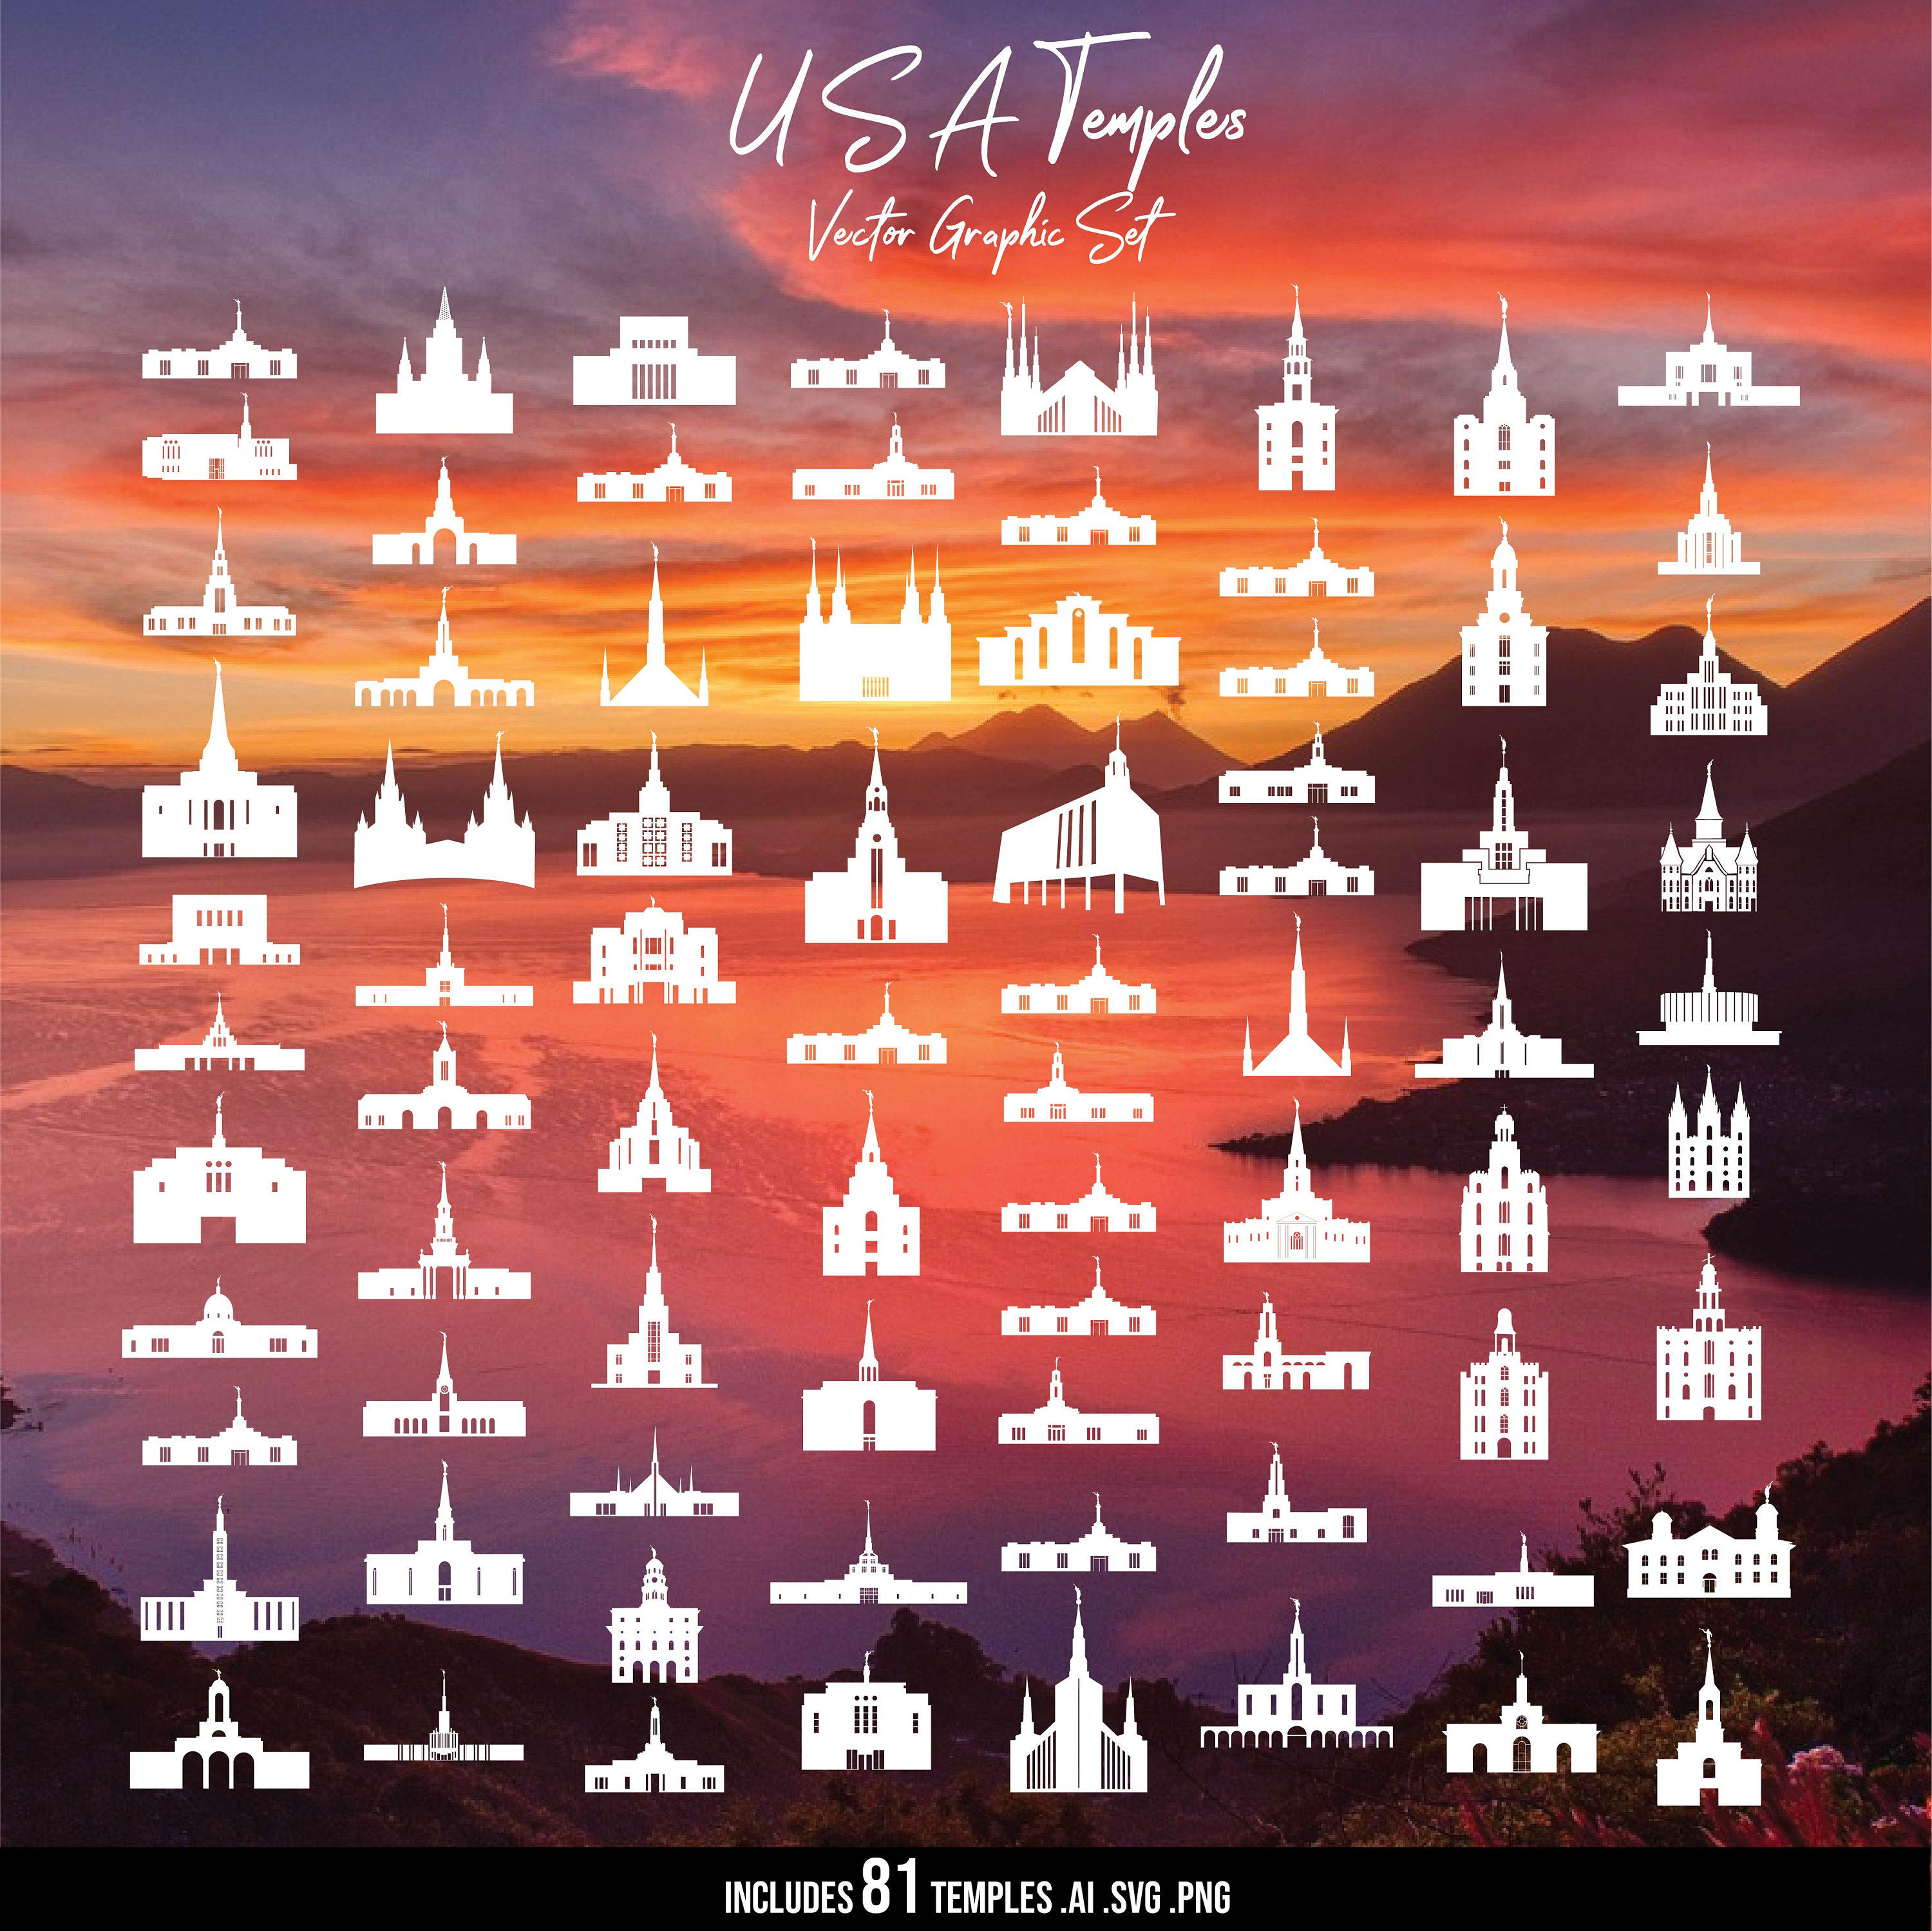 LDS Temple Vector Set USA Temples United States Temples Etsy